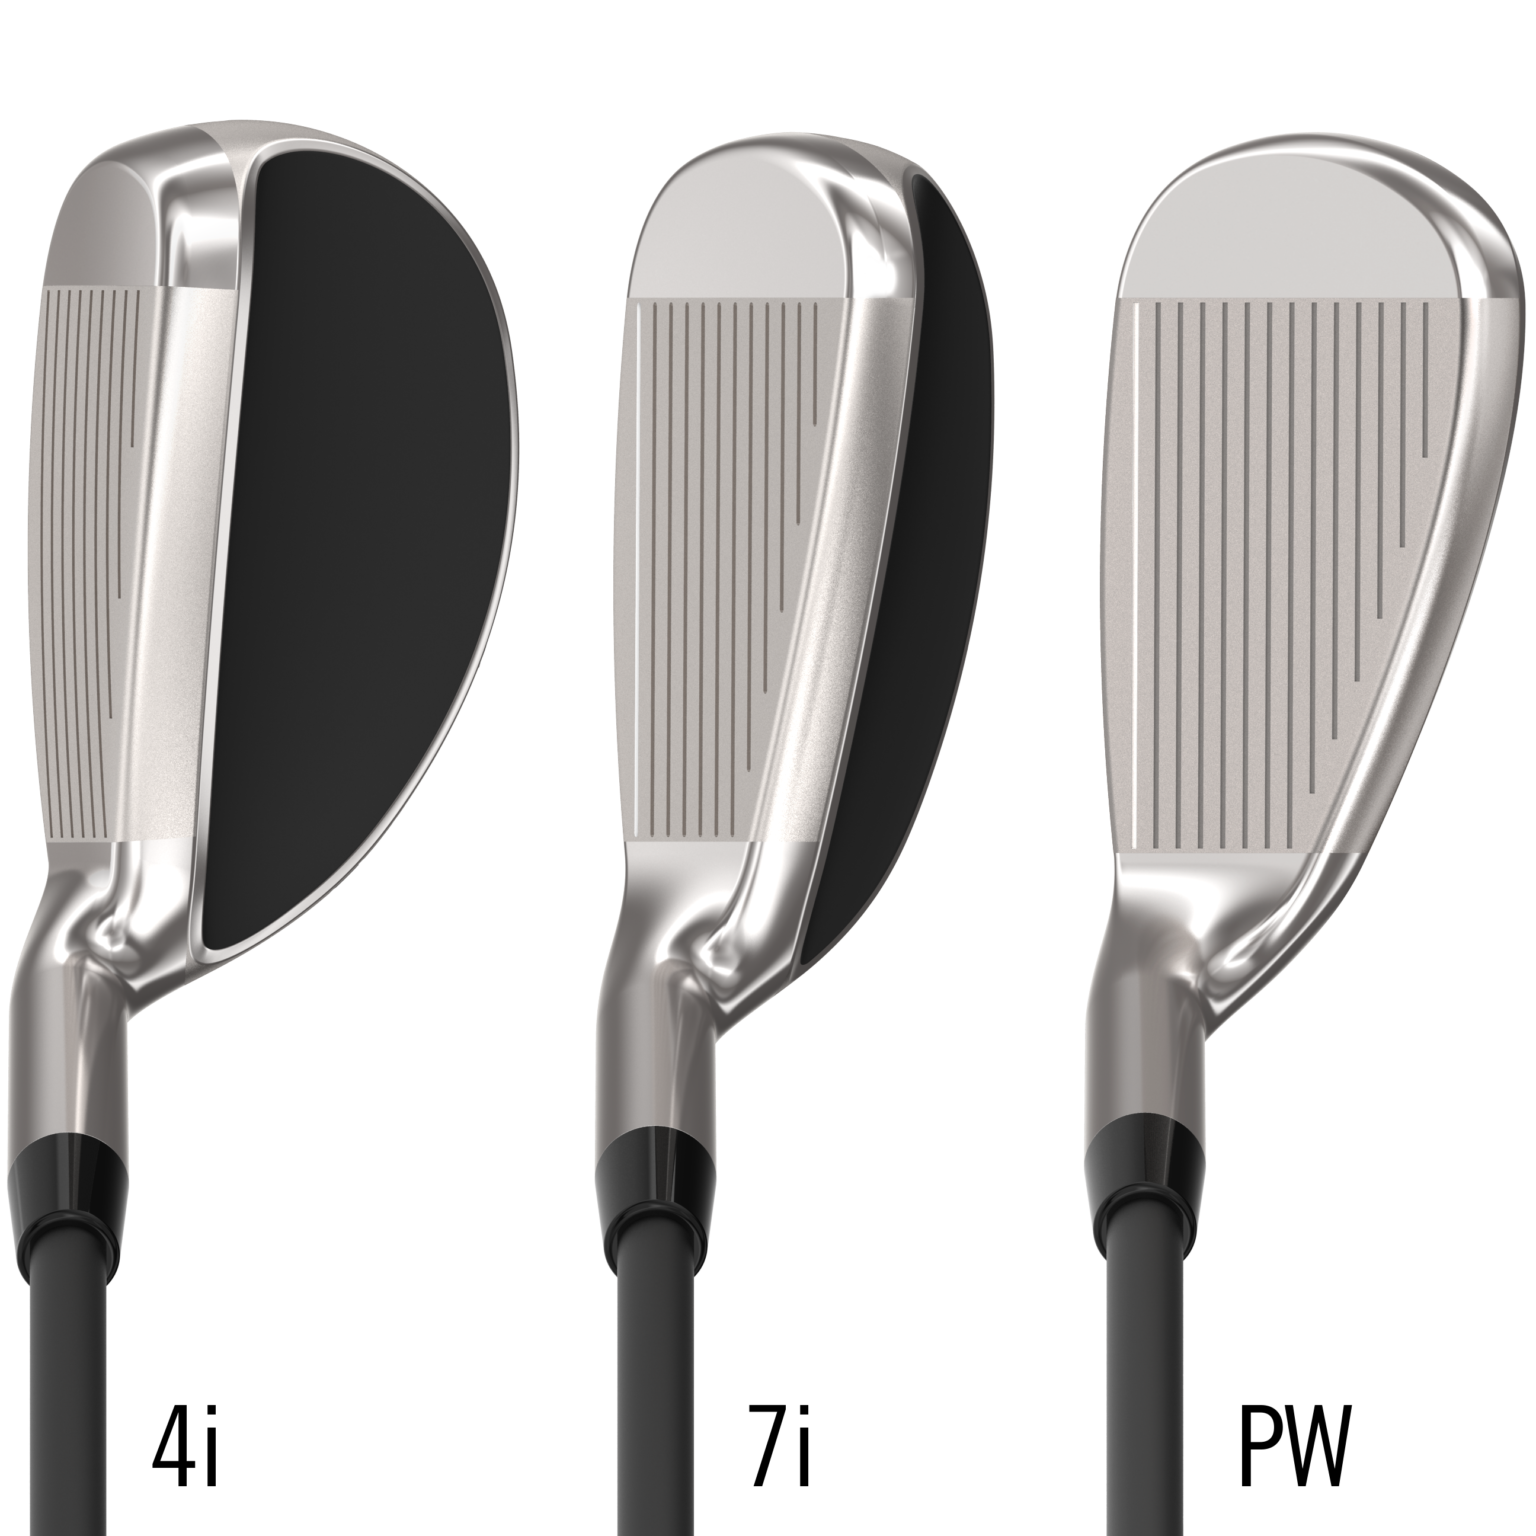 Now Available for Order Cleveland Launcher XL HALO Irons Morton Golf